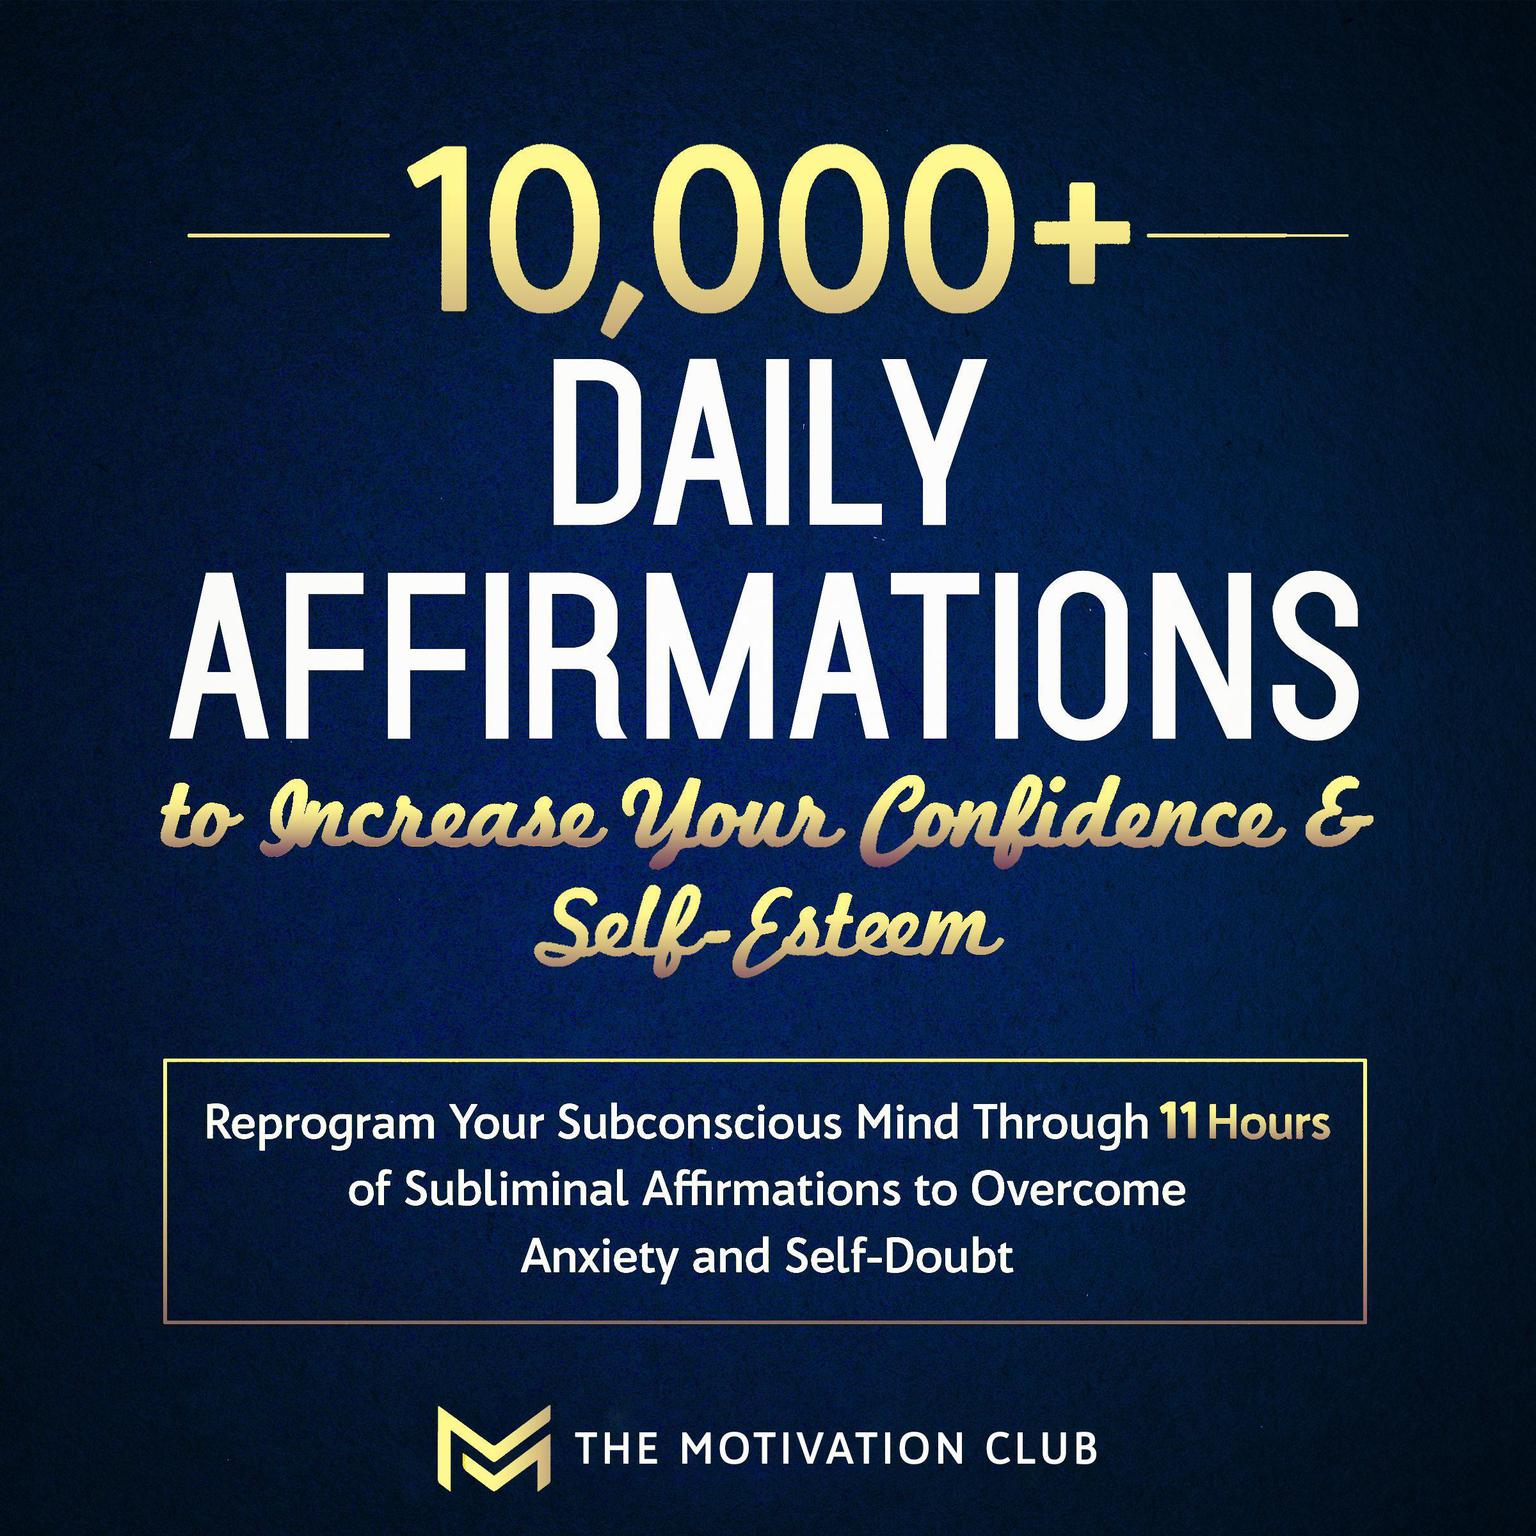 10,000+ Daily Affirmations to Increase Your Confidence and Self-Esteem: Reprogram Your Subconscious Mind Through 11 Hours of Subliminal Affirmations to Overcome Anxiety and Self-Doubt Audiobook, by The Motivation Club